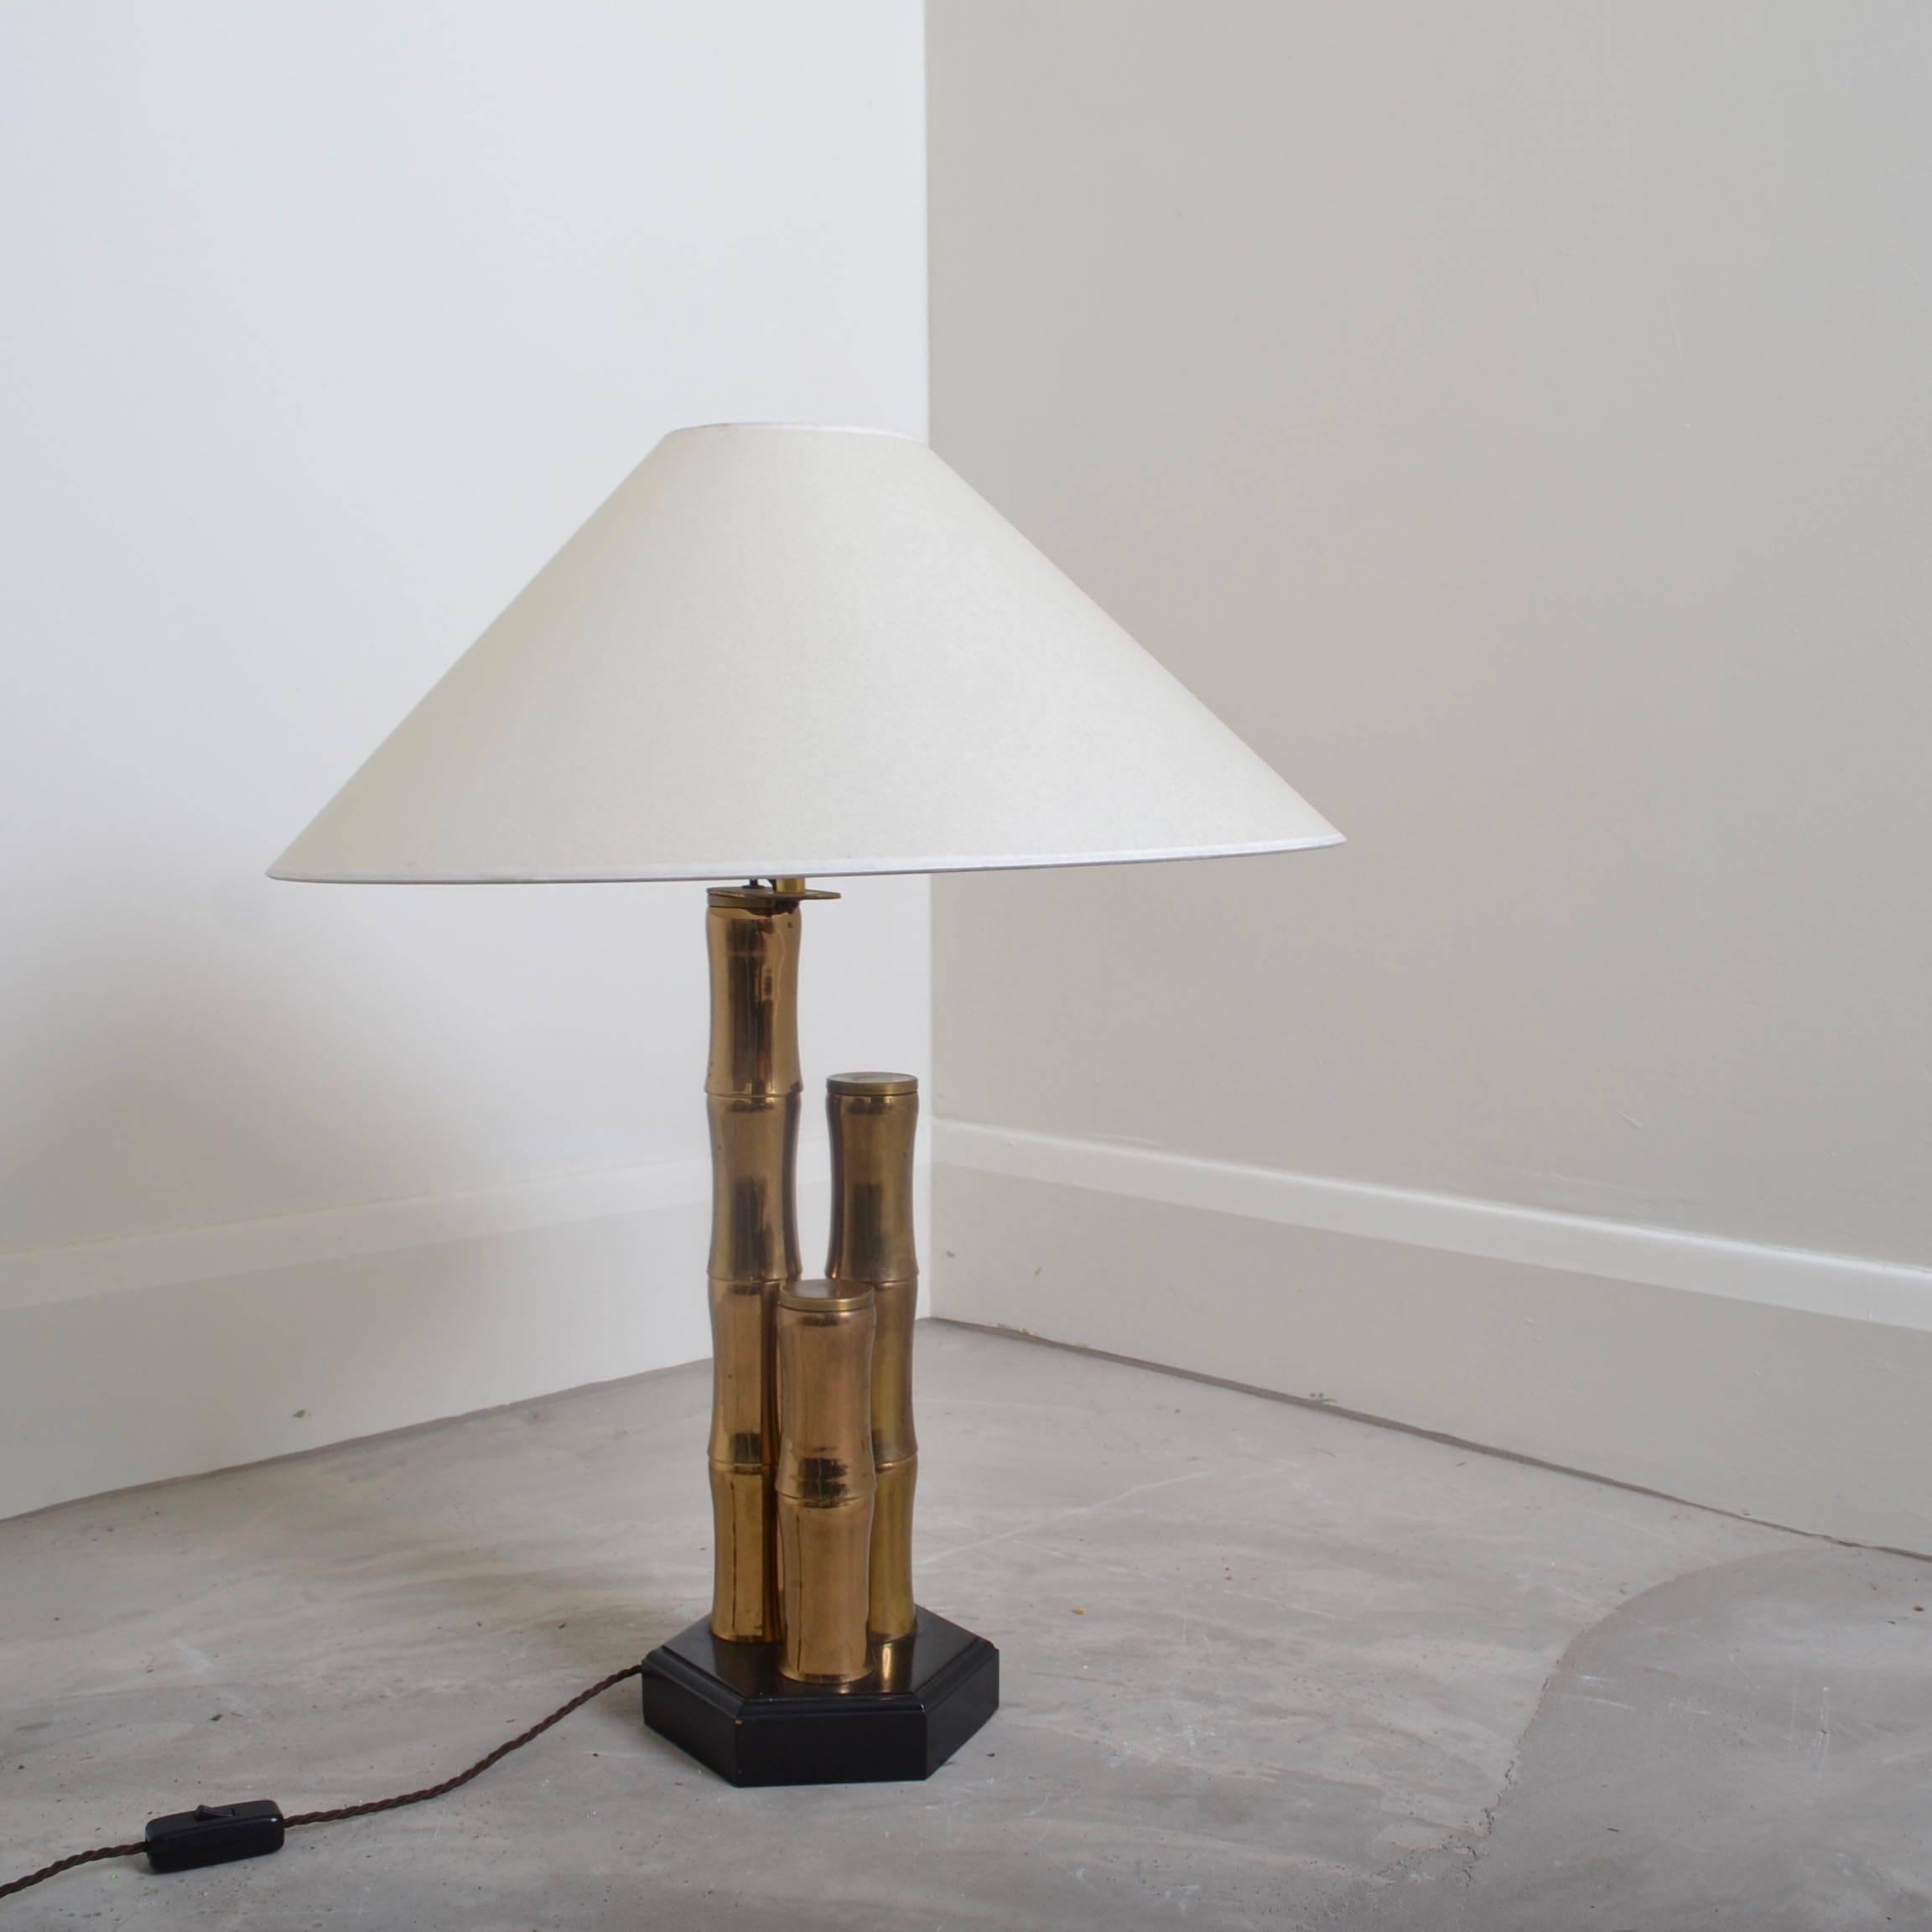 Unusual sectional bamboo table lamp finished in lacquered brass on
an ebonised wooden base . The paper shade is newly recovered from the
original lampshade wire frame and the lamp is re-wired to UK PAT safety standard.